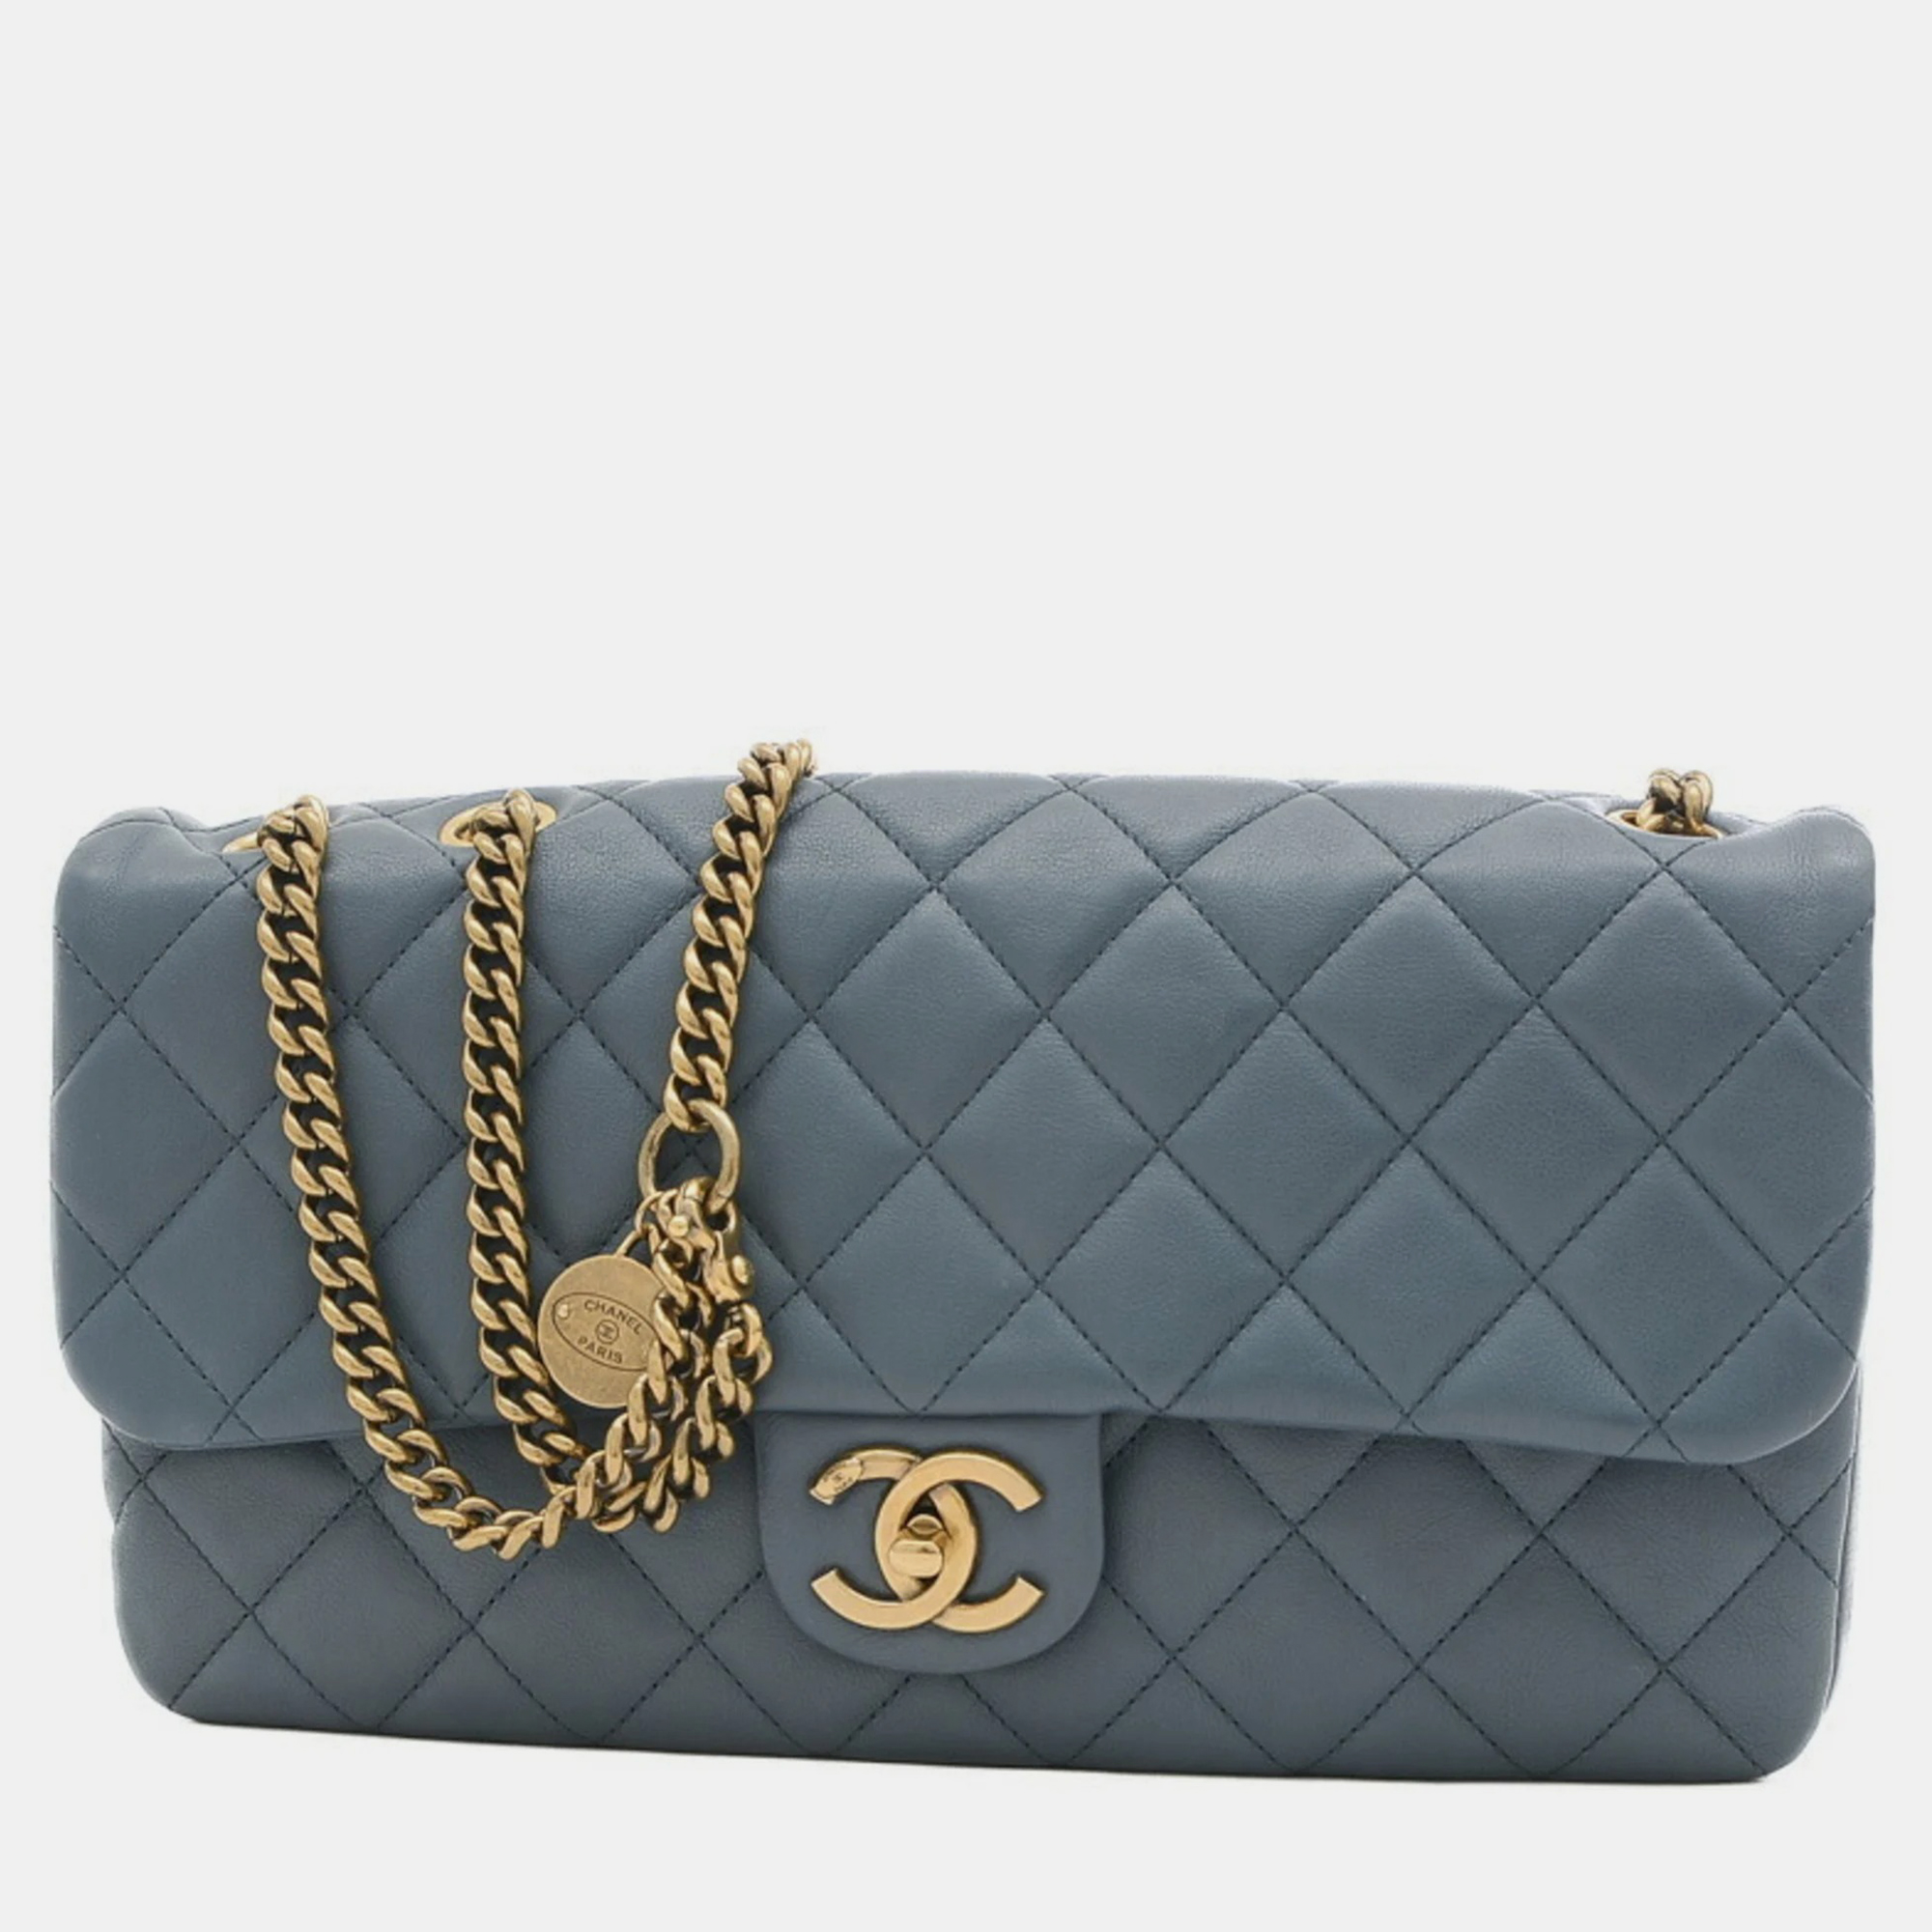 Chanel leather blue matelasse coin charm chain shoulder bag